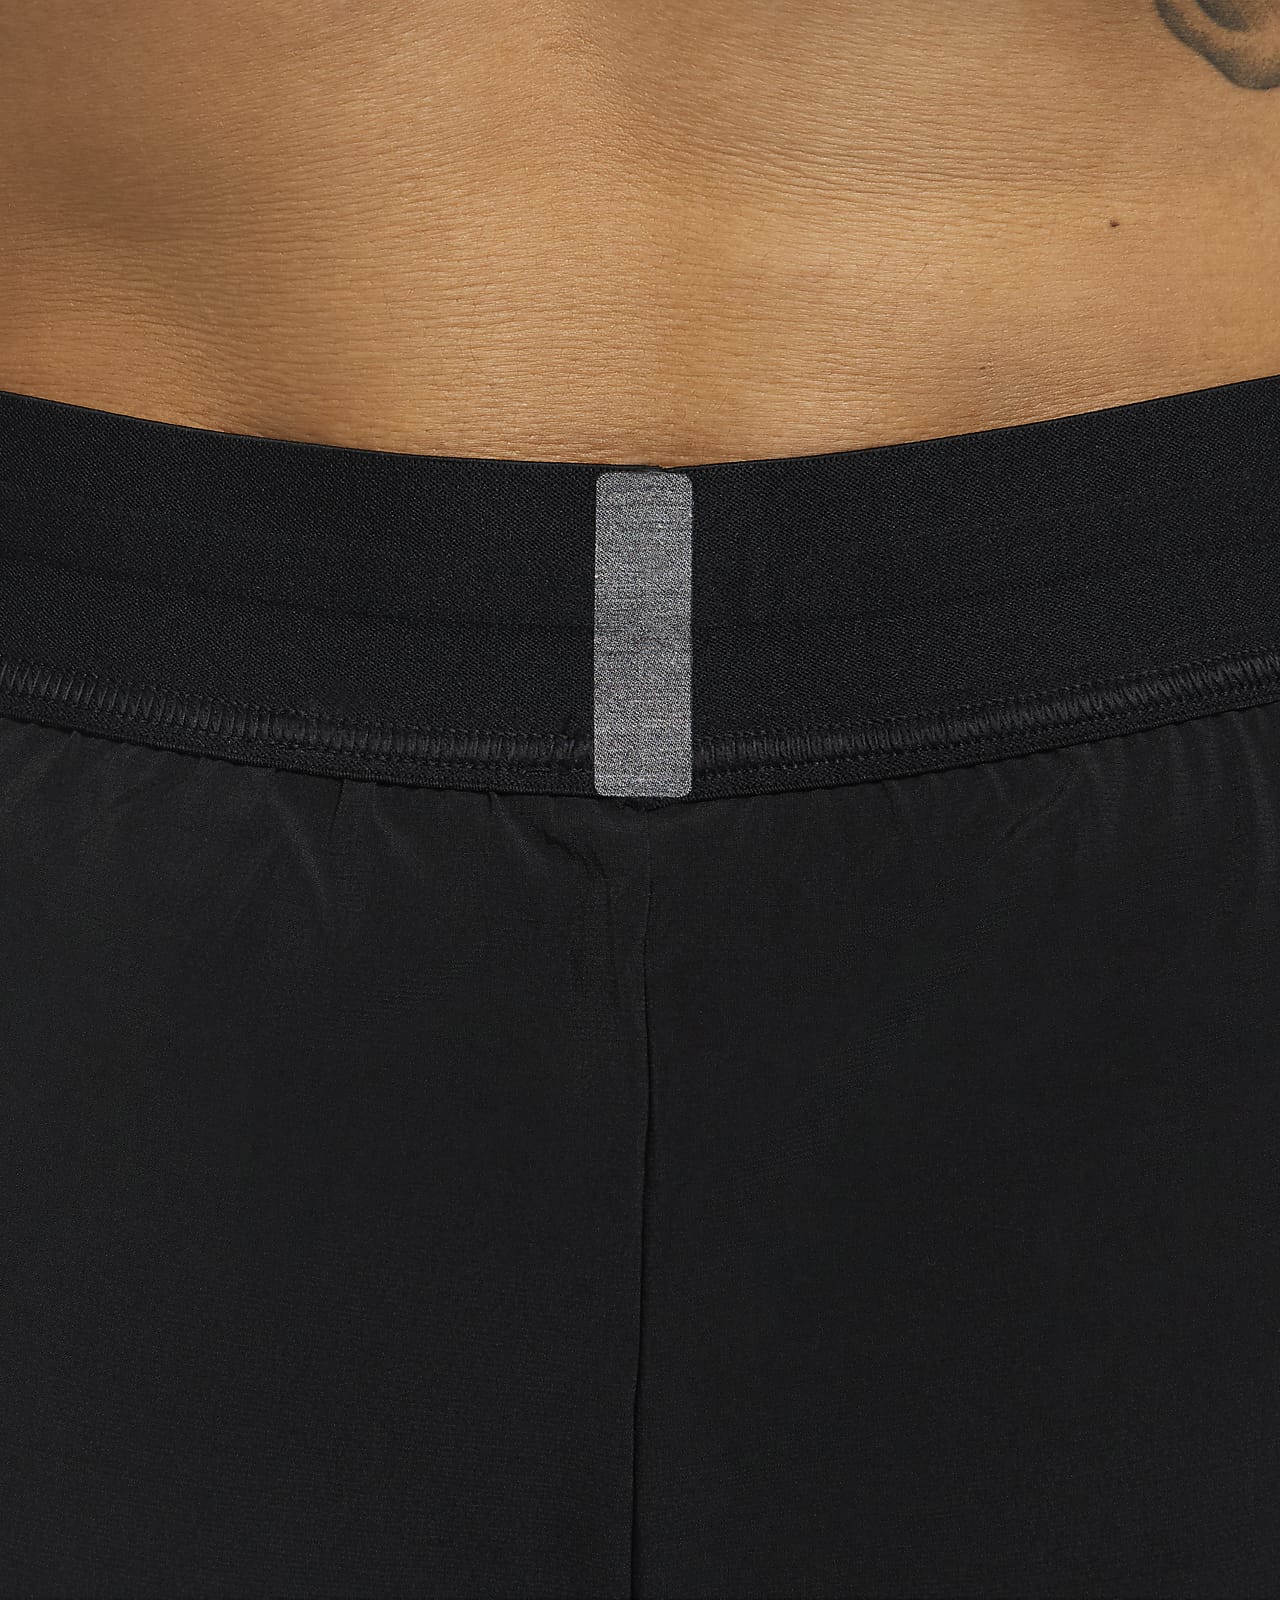 Running Yoga Shorts for Women High Waist Quick Dry Inner Pocket Double Layer Workout Shorts.